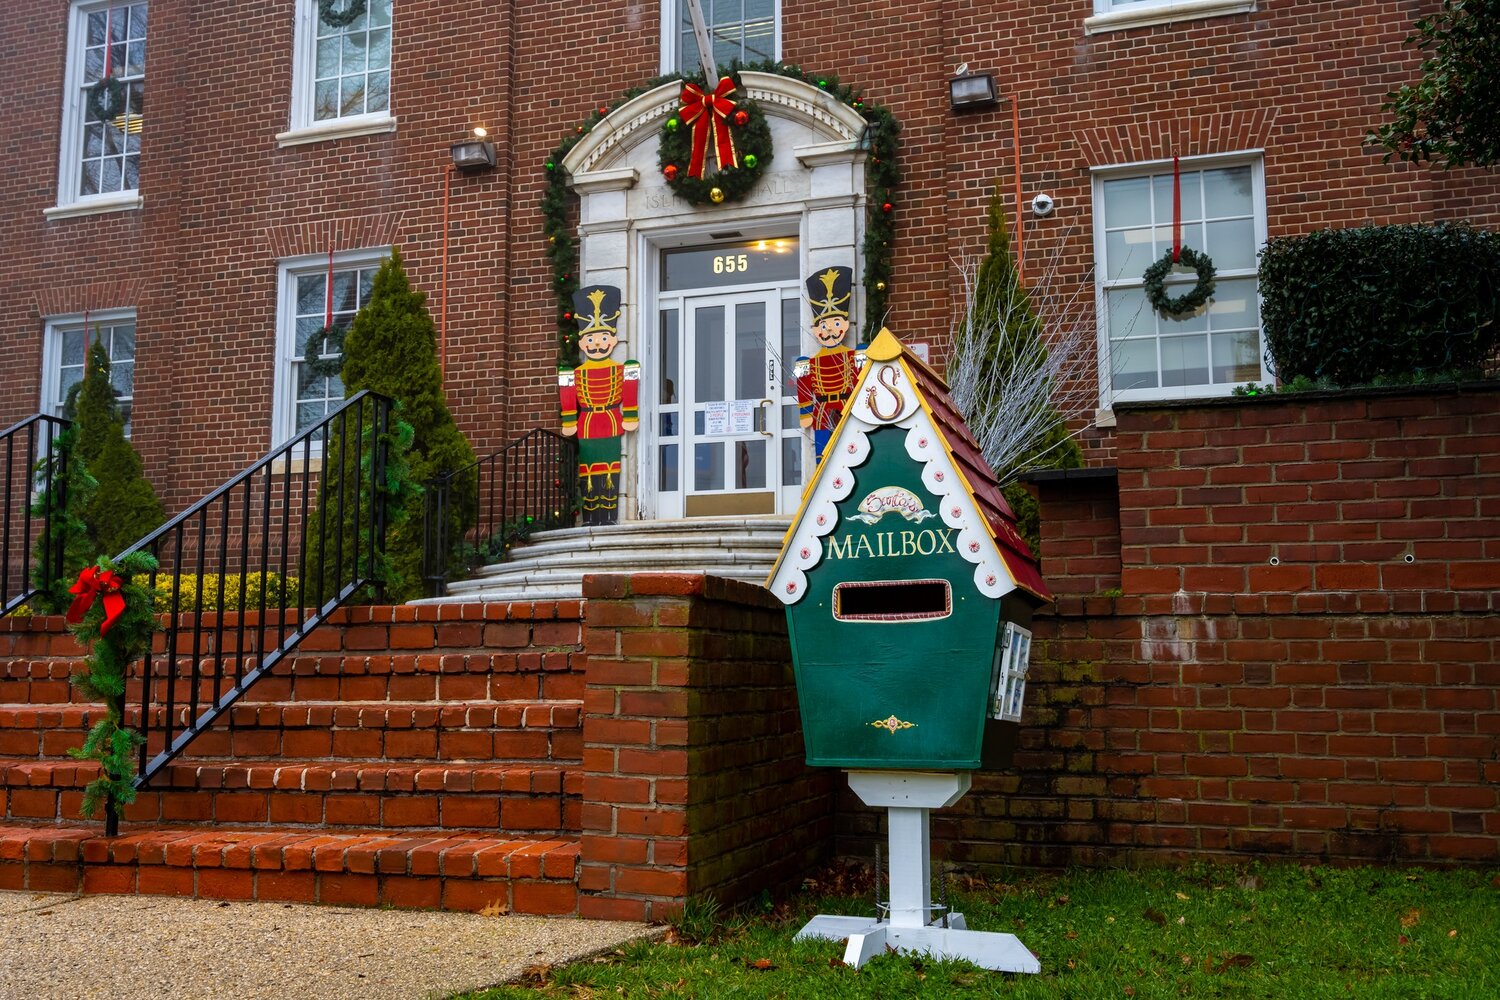 Islip Town Hall, pictured last year, was decorated beautifully for the holiday season.